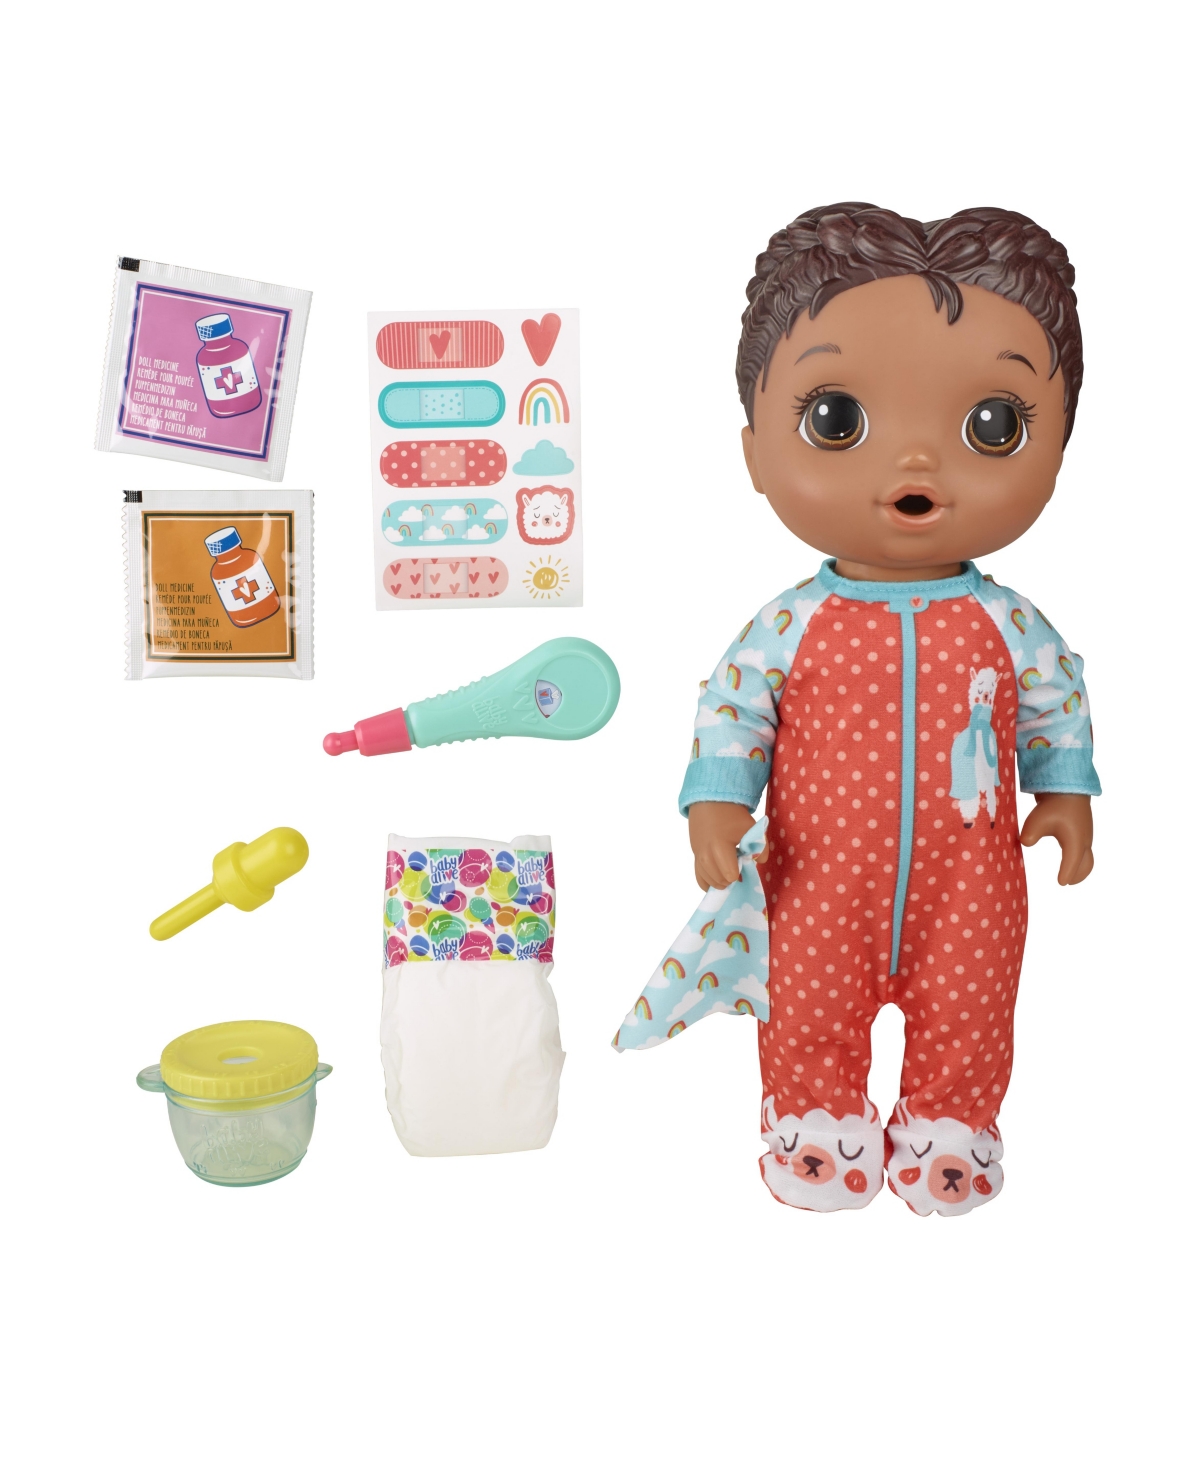 EAN 5010993659203 product image for Baby Alive Mix My Medicine | upcitemdb.com